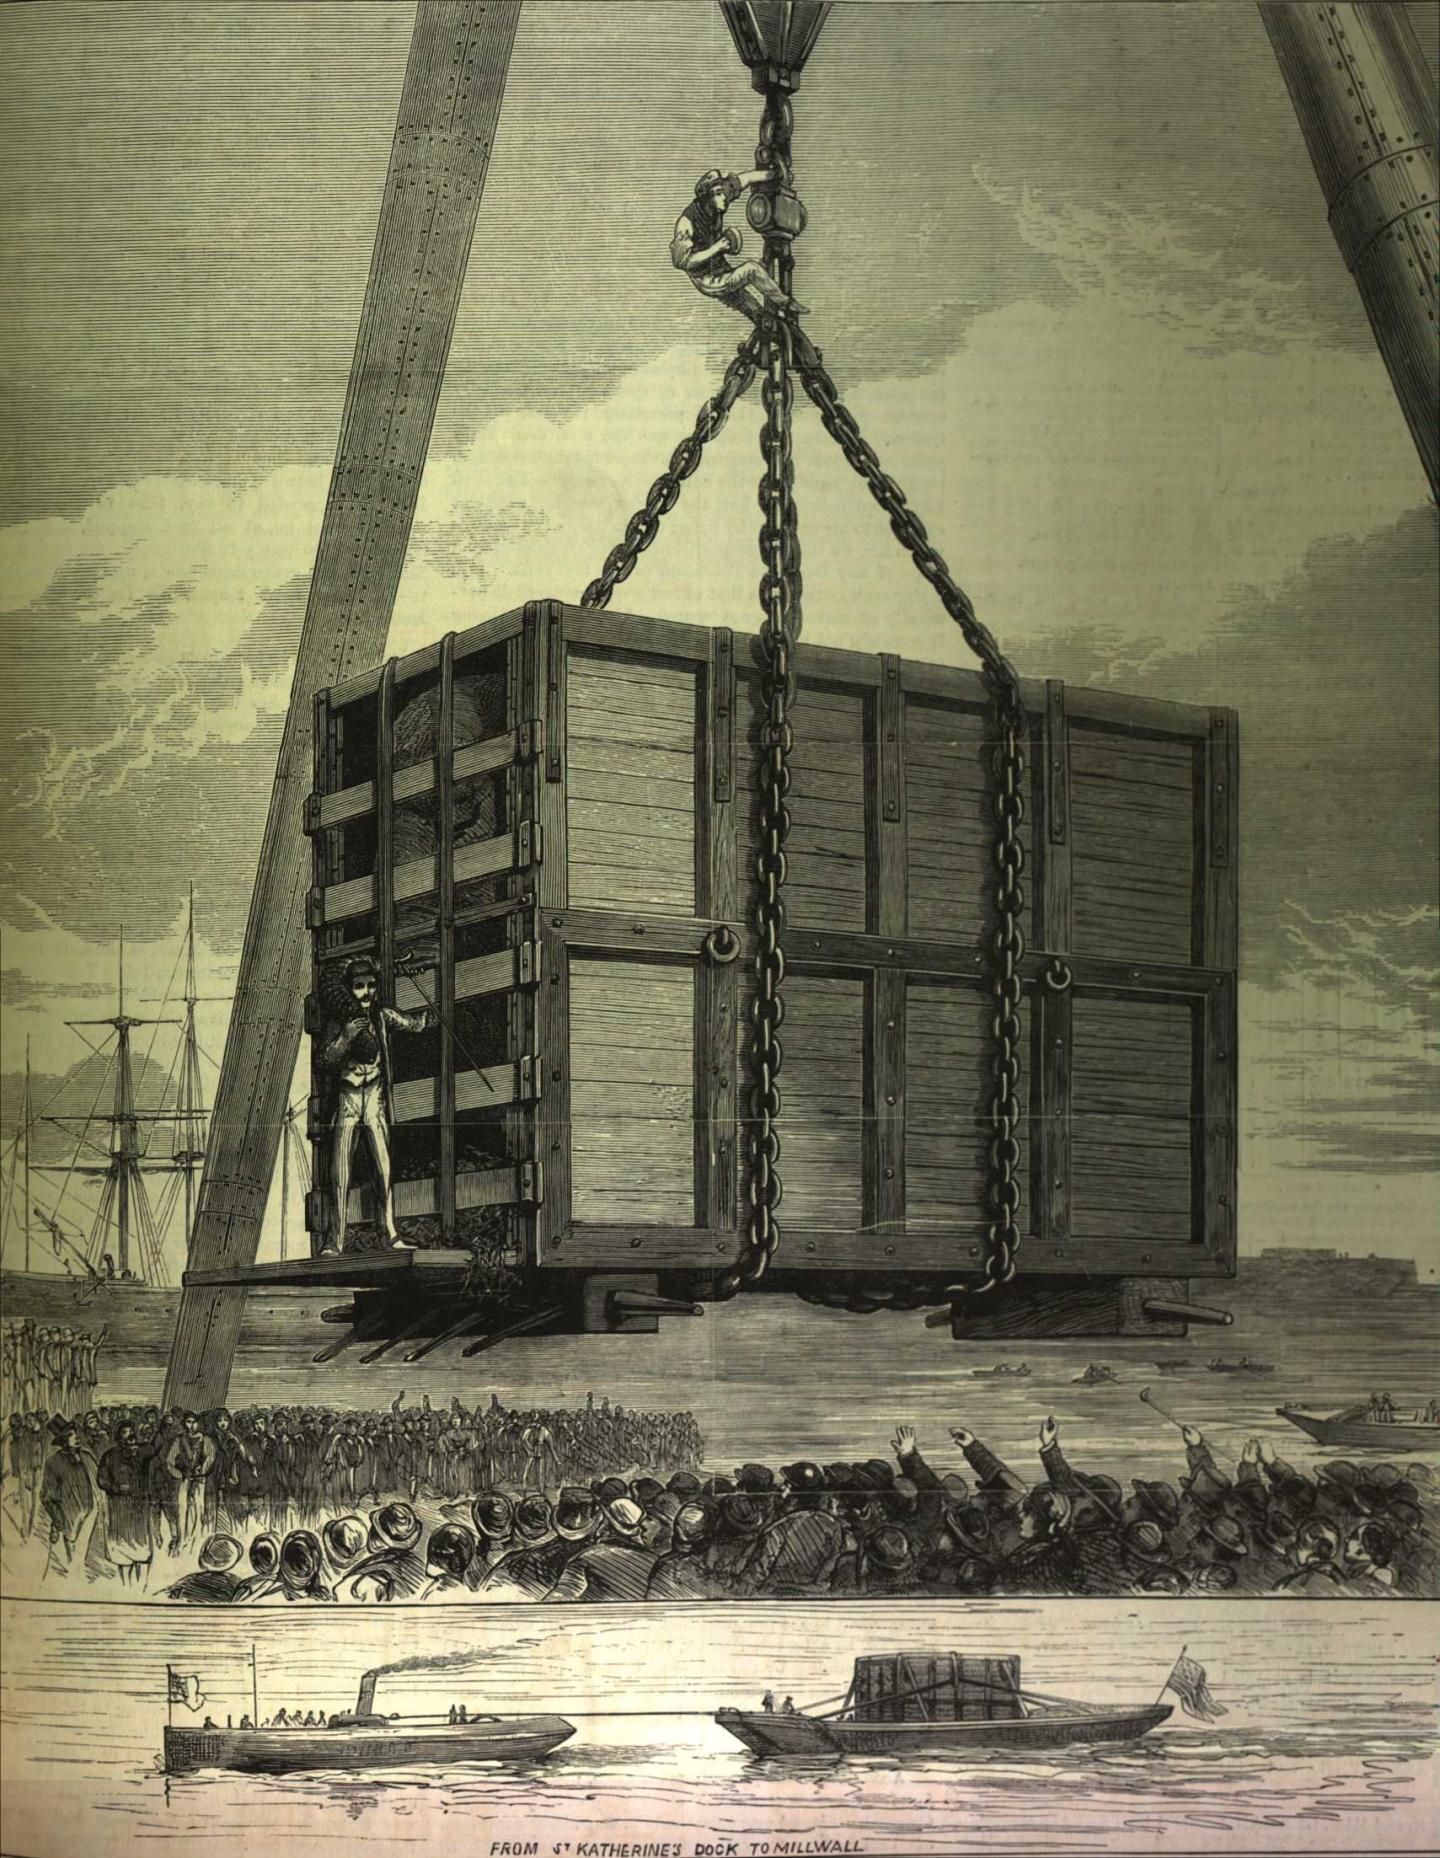 Jumbo being hoisted in a crate at St Katherine’s Dock from the front page of ILN, 1 April 1882